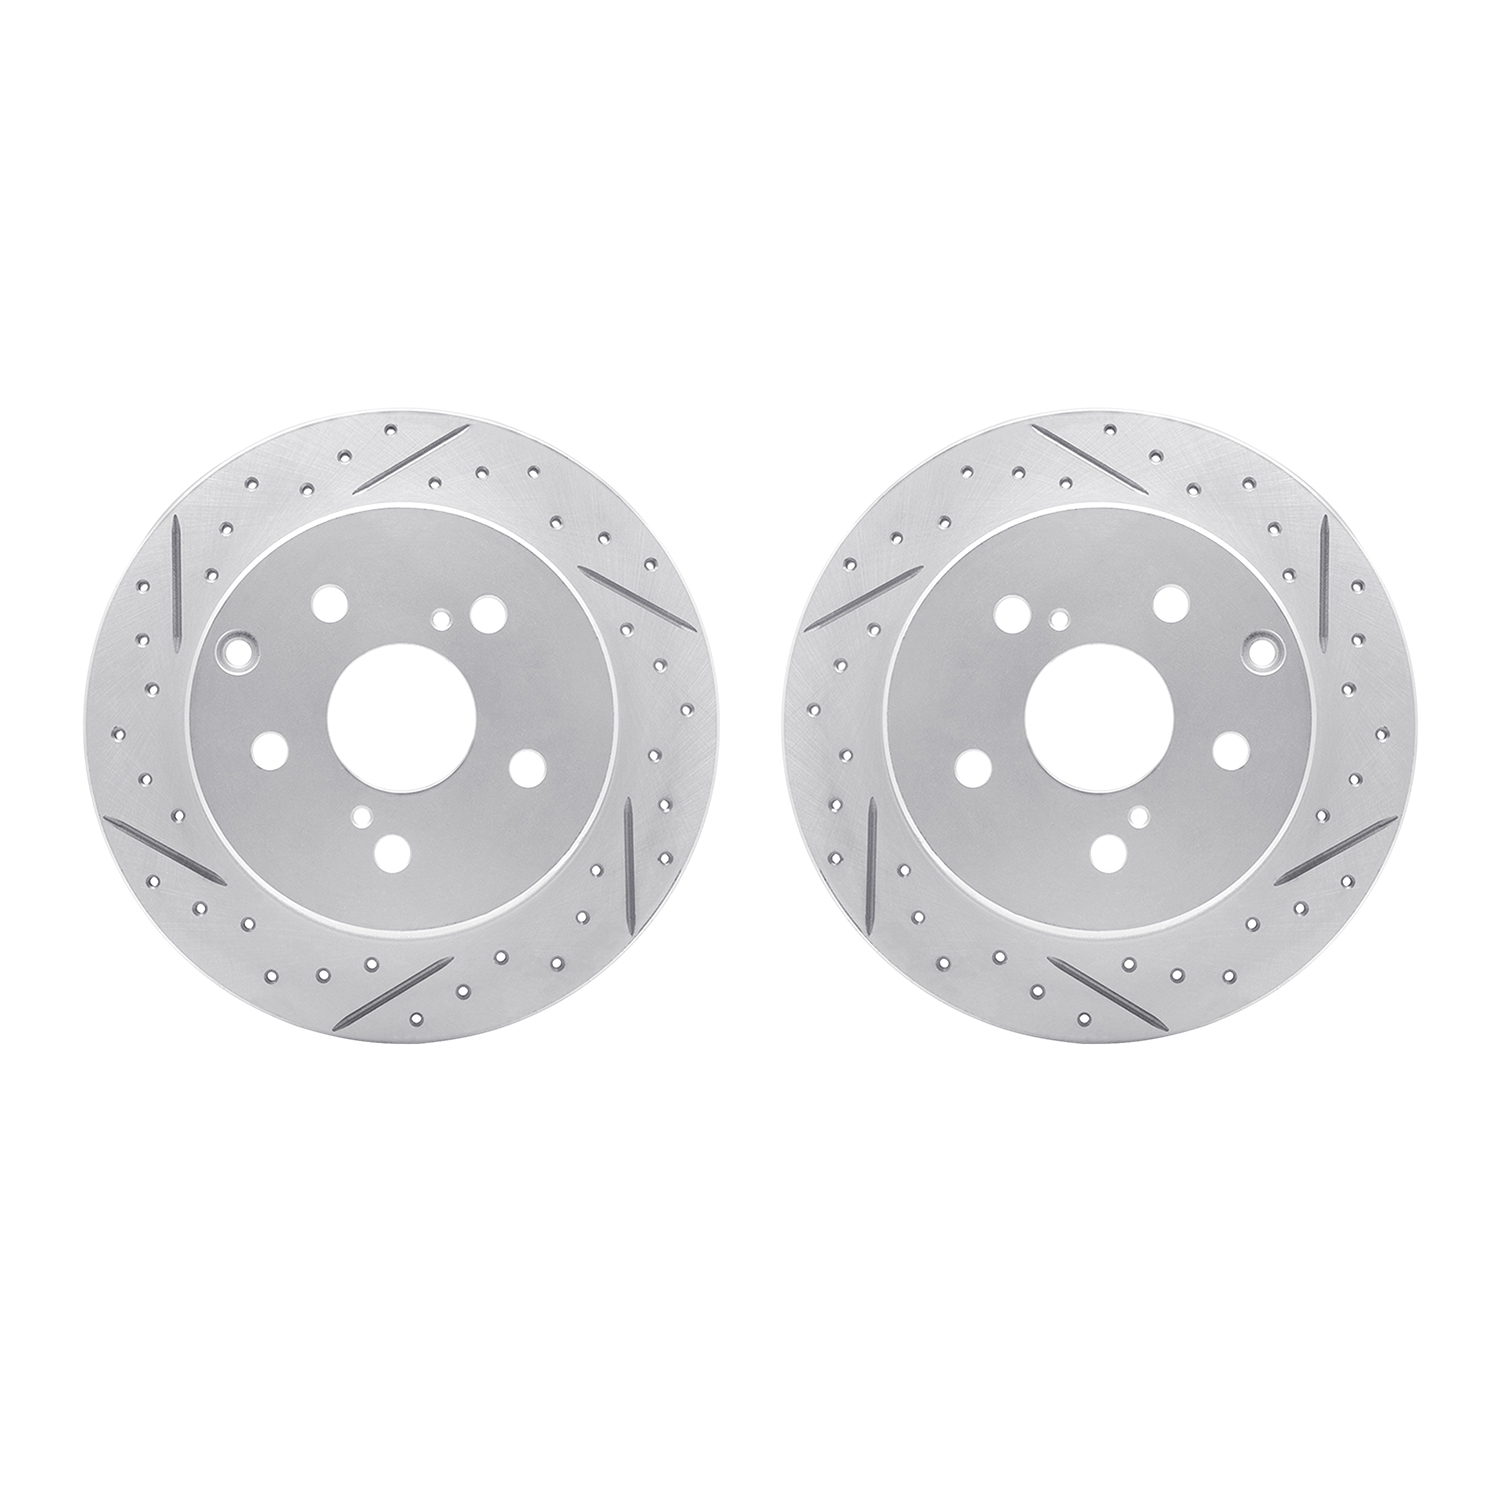 2002-76047 Geoperformance Drilled/Slotted Brake Rotors, 2006-2018 Lexus/Toyota/Scion, Position: Rear